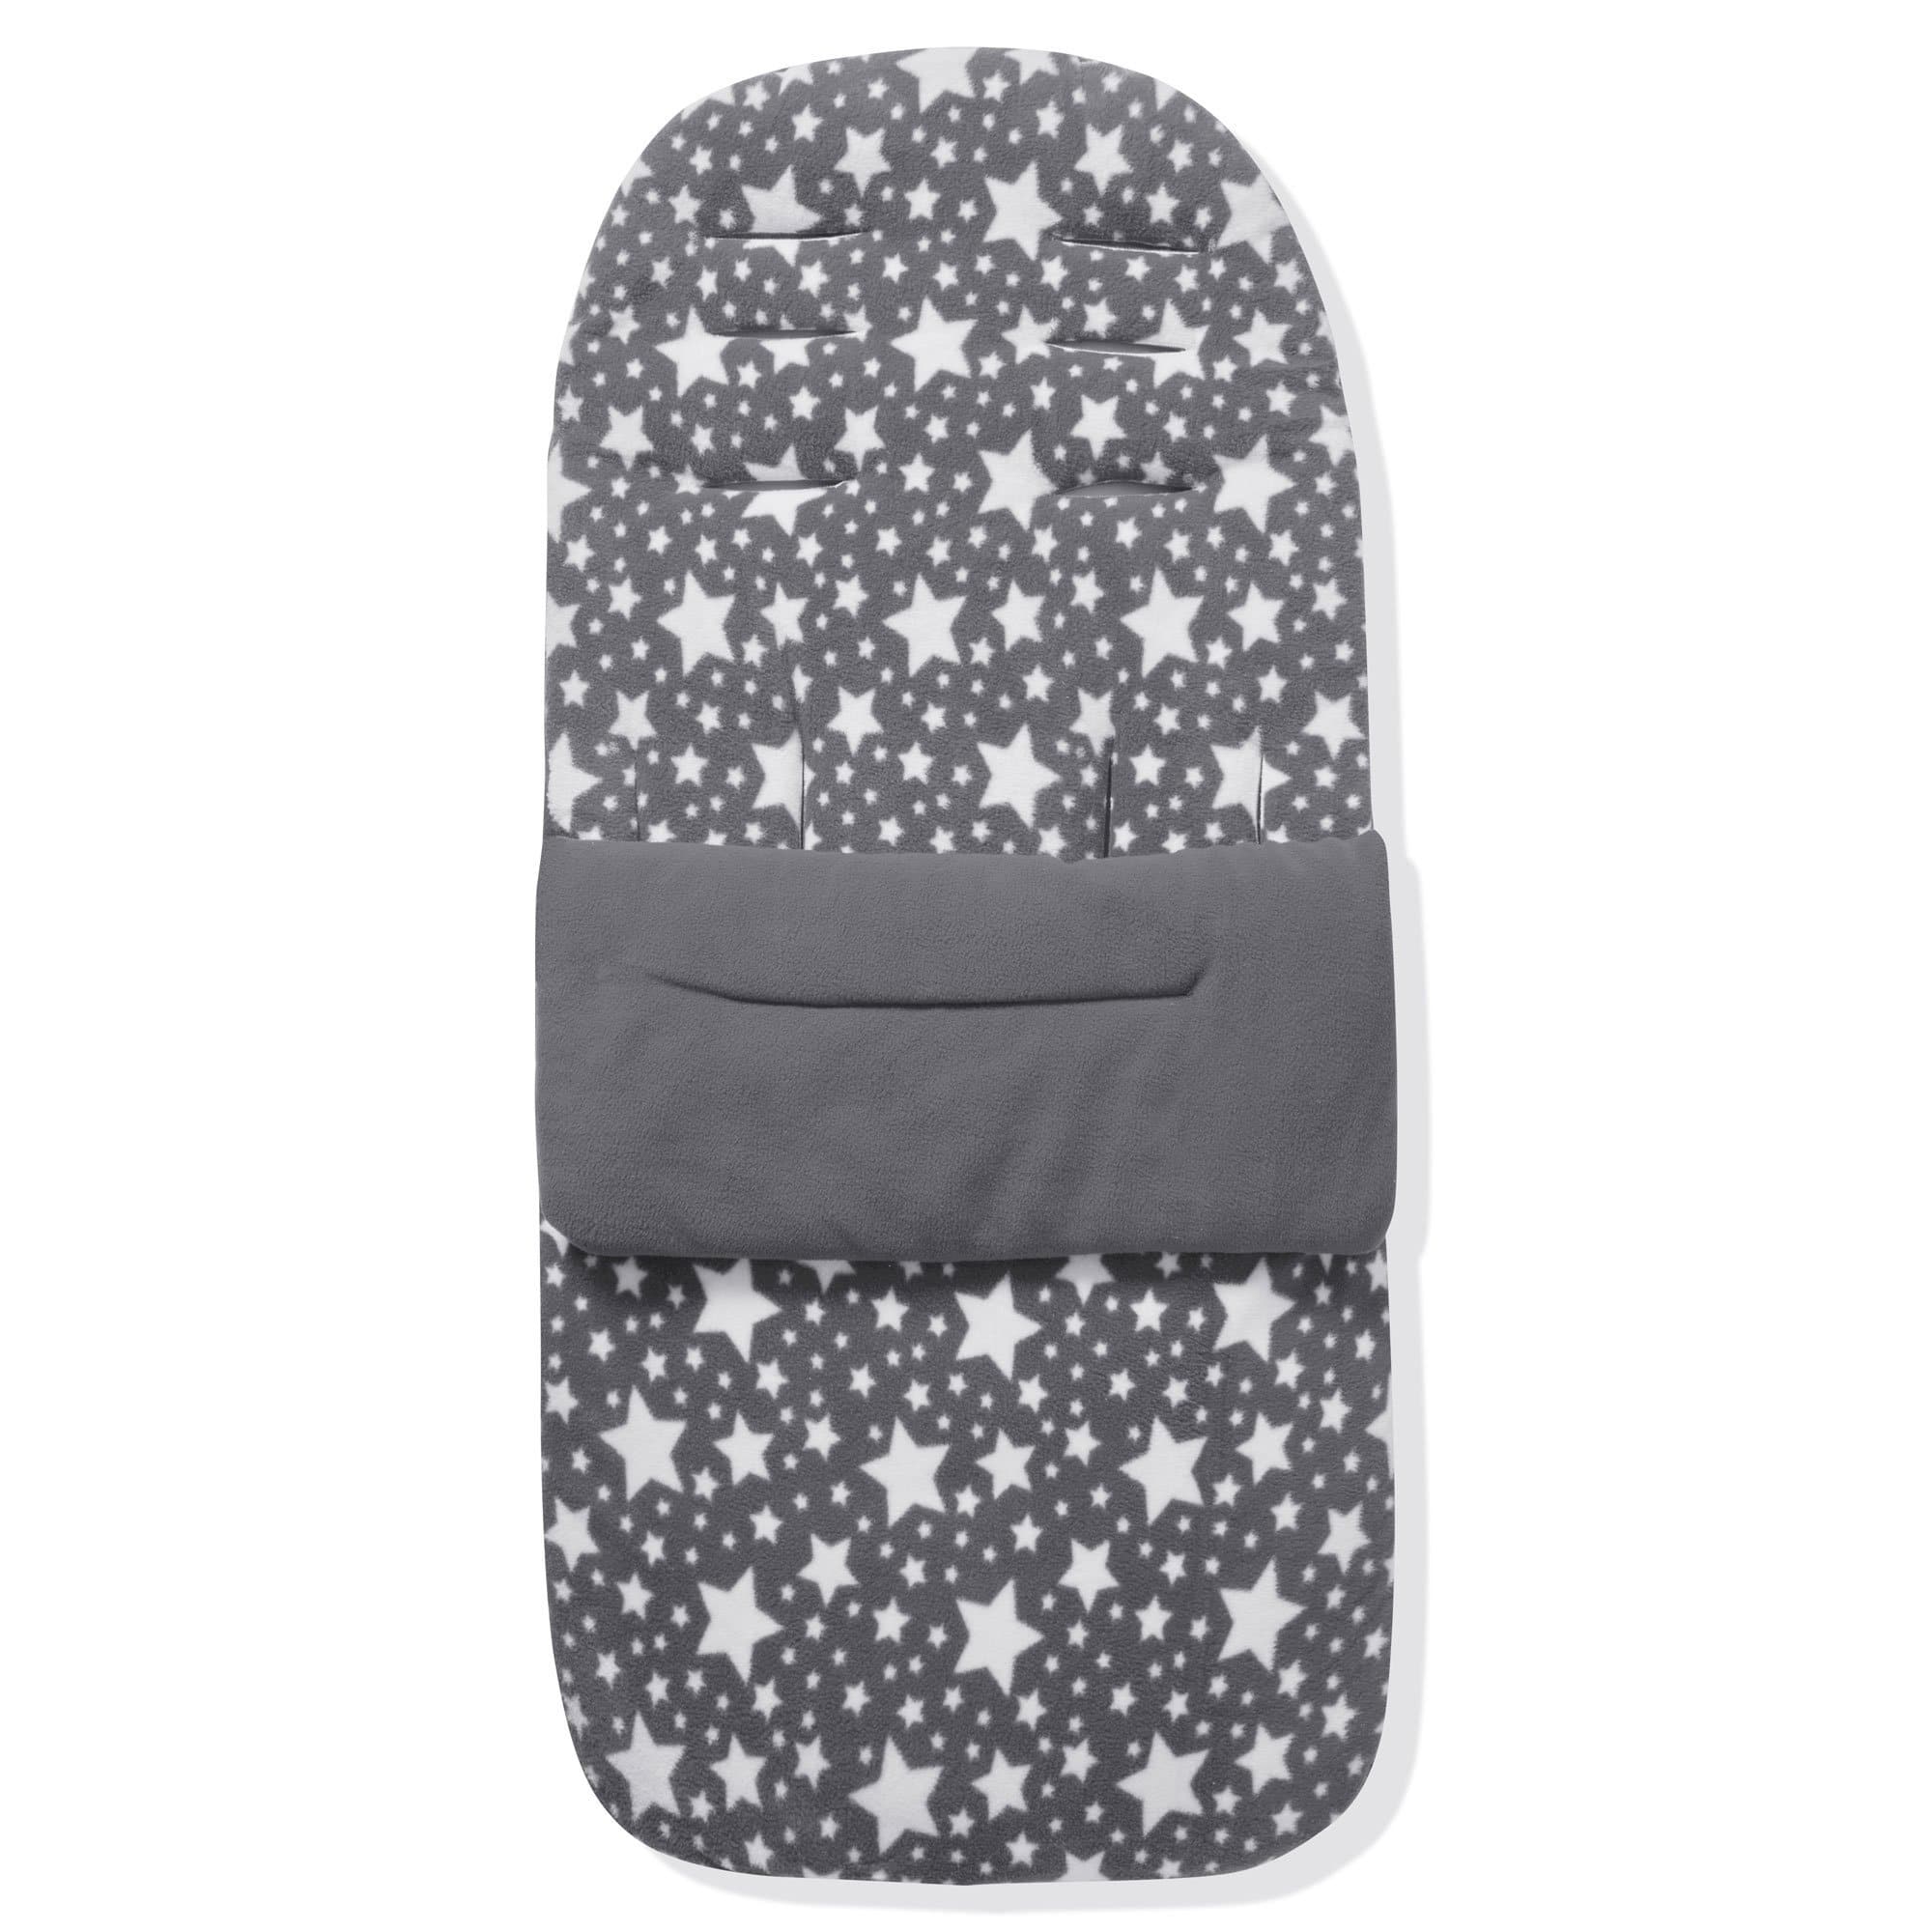 Fleece Footmuff / Cosy Toes Compatible with Looping - Grey Star / Fits All Models | For Your Little One